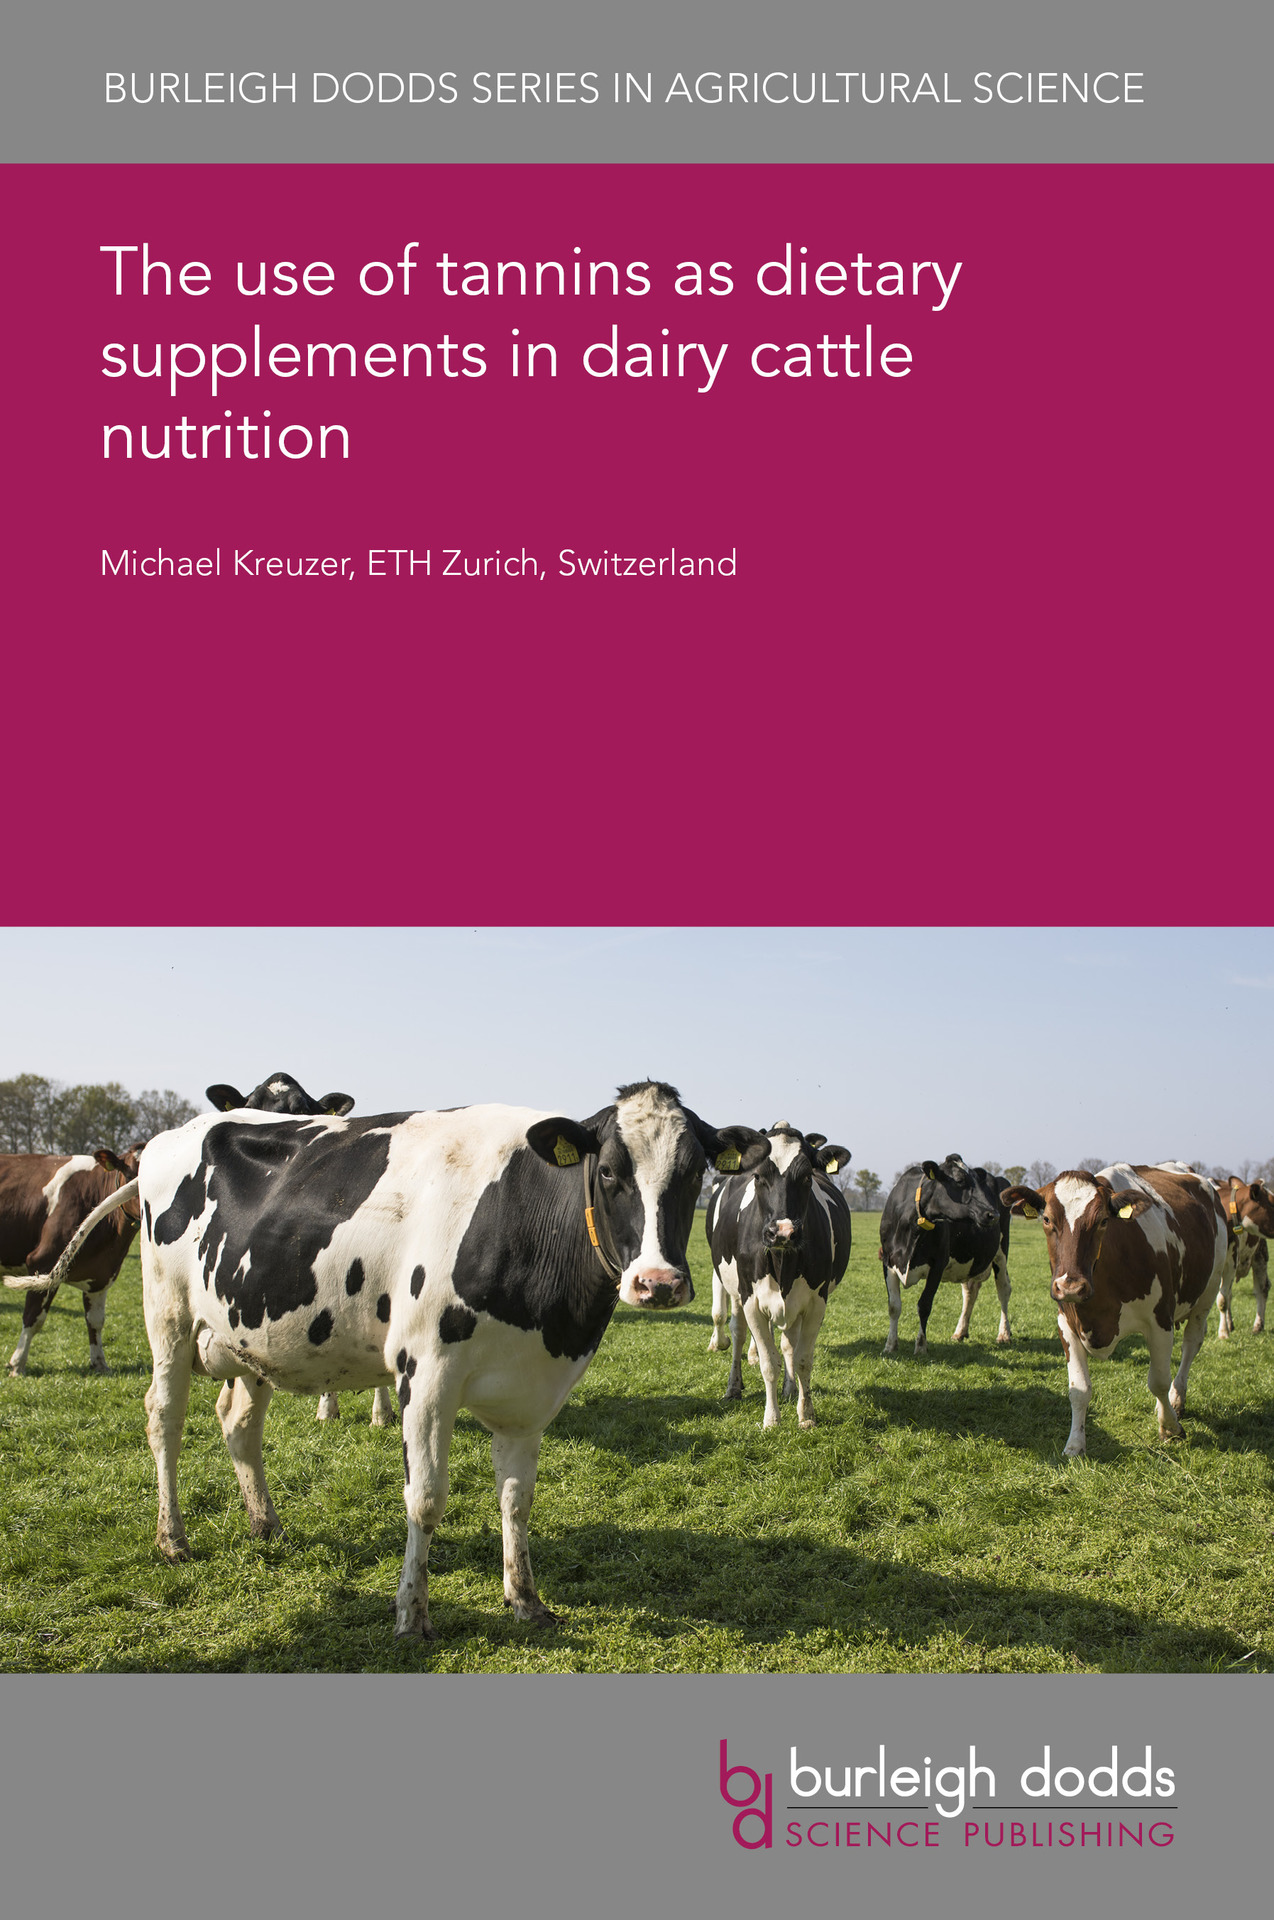 The use of tannins as dietary supplements in dairy cattle nutrition